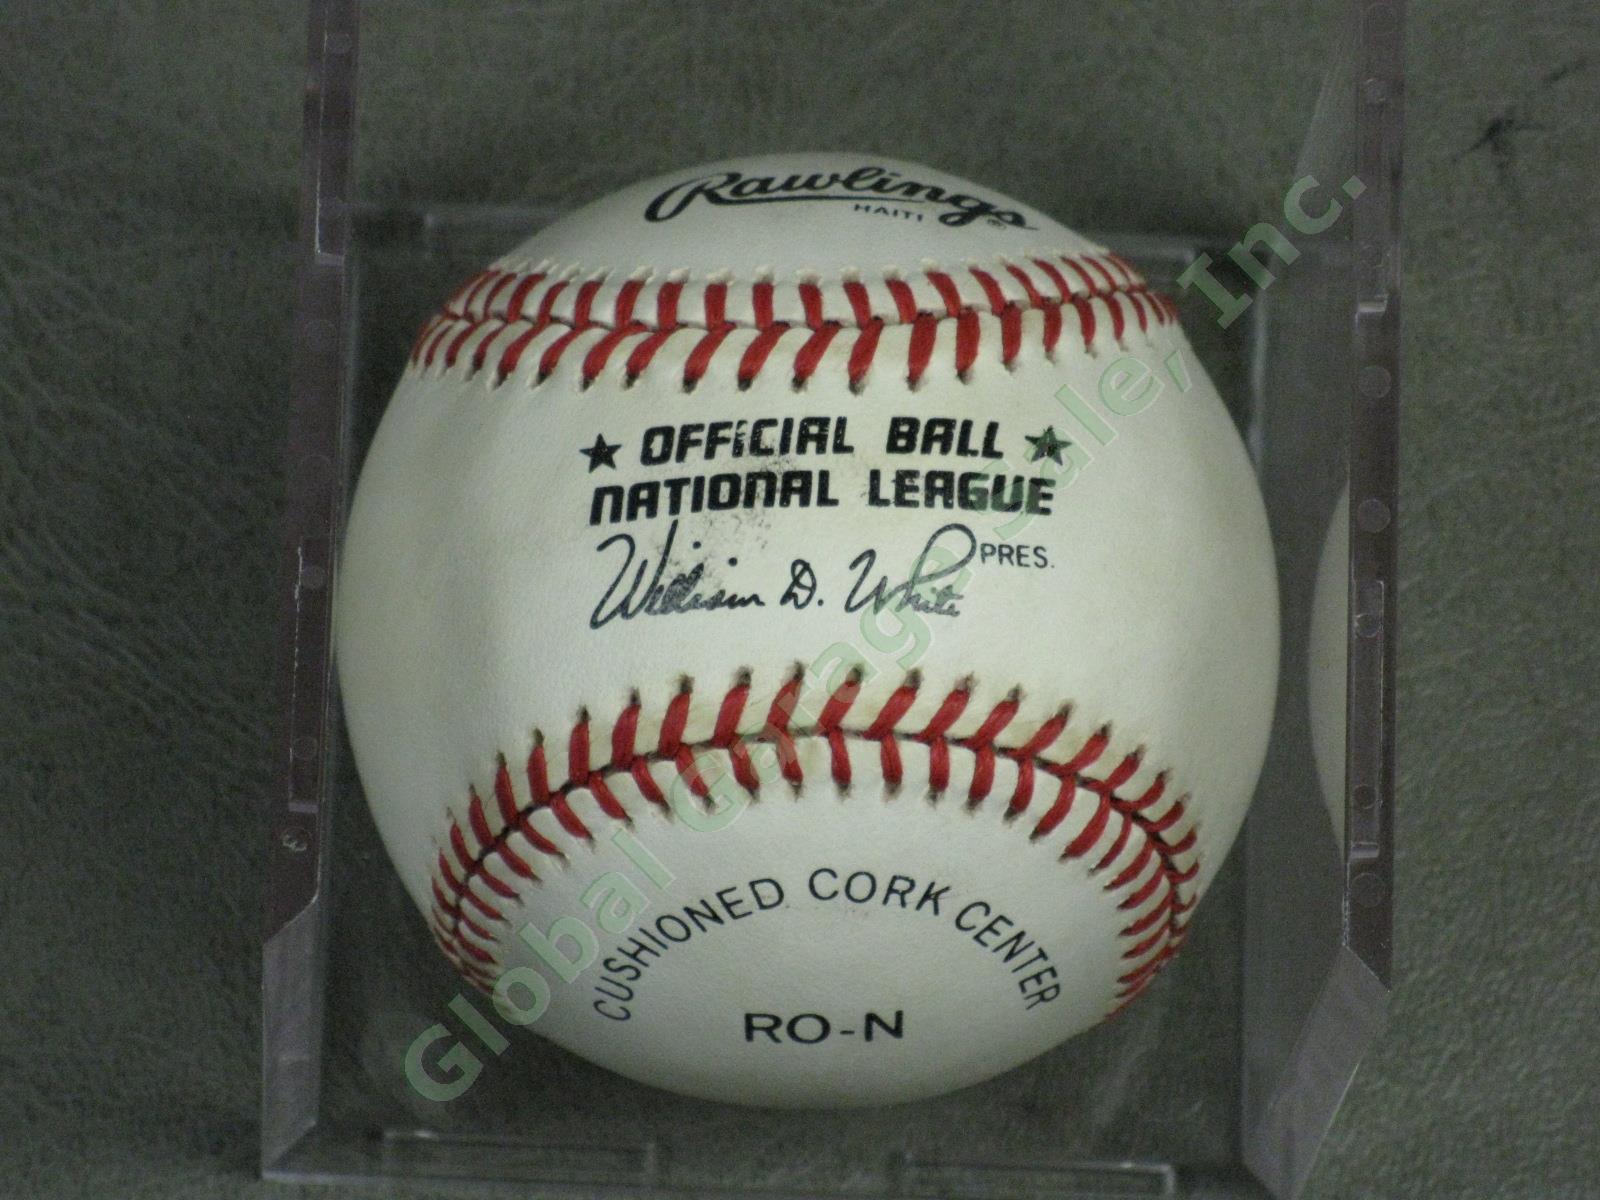 Leo Durocher Hall Of Fame Hand Signed Ball Official National League Baseball NR! 2